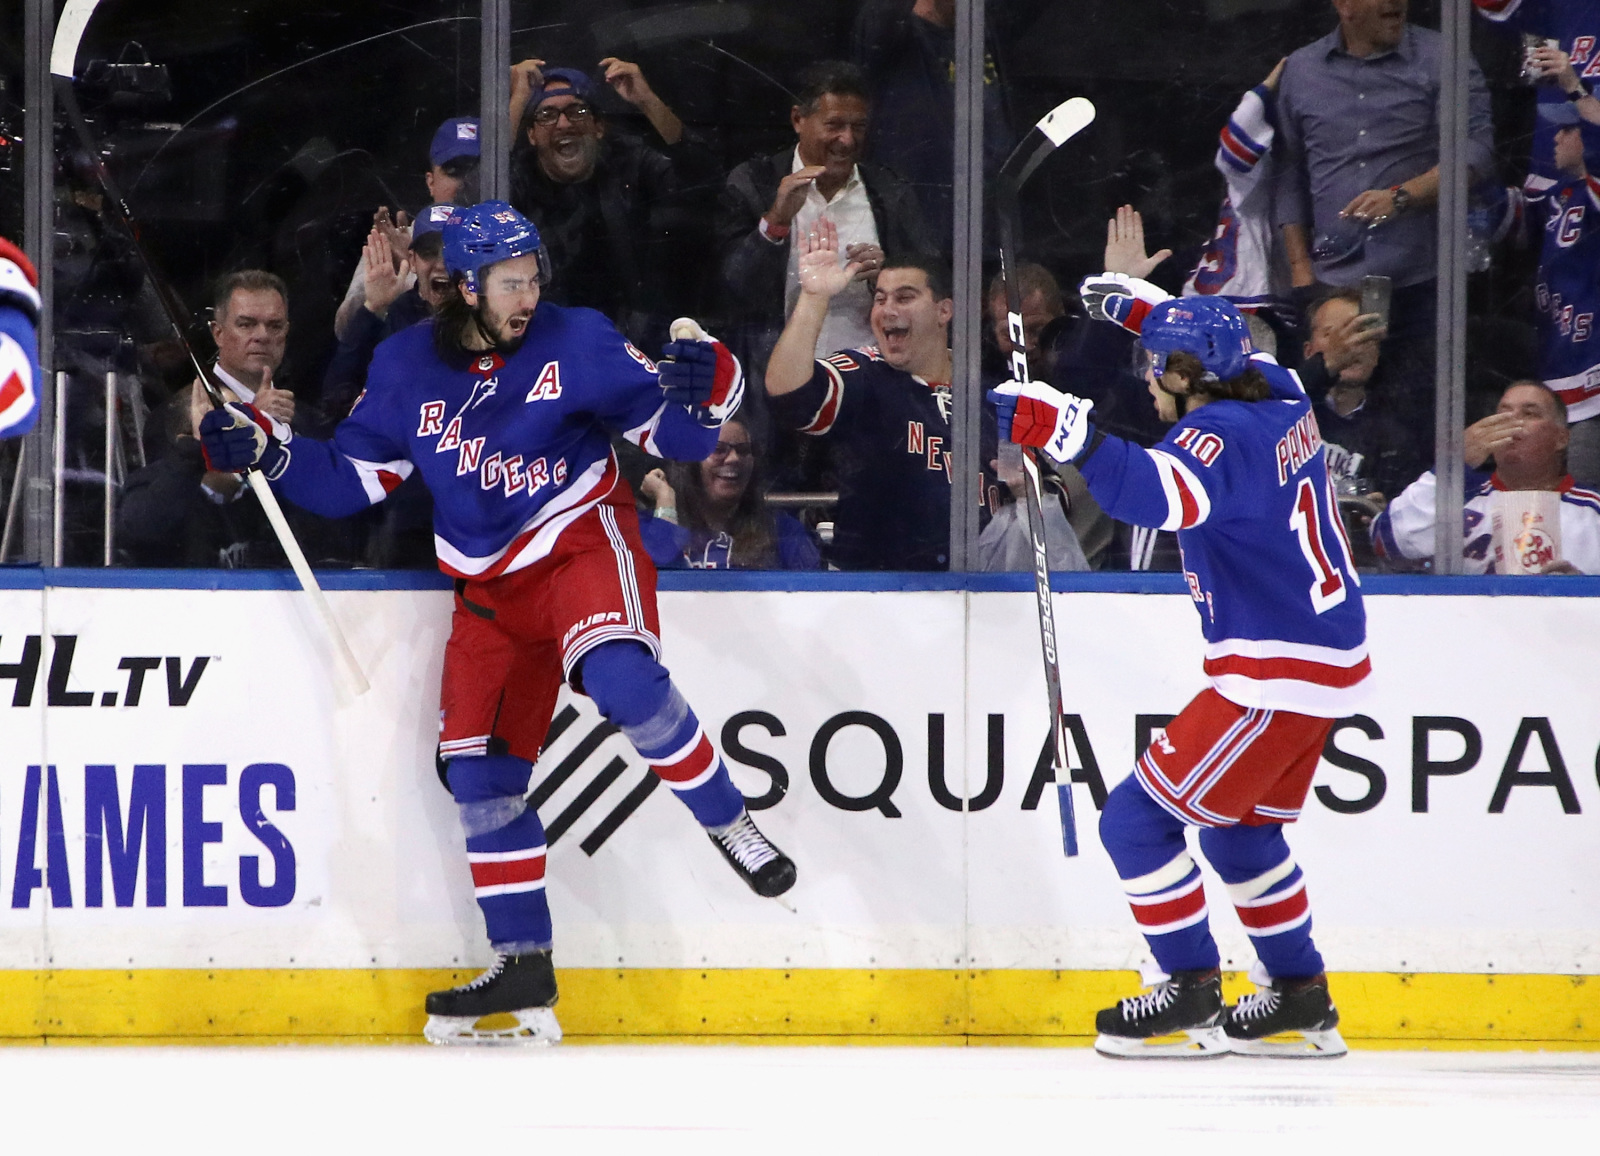 New York Rangers: How dynamic a duo are Panarin & Zibanejad?